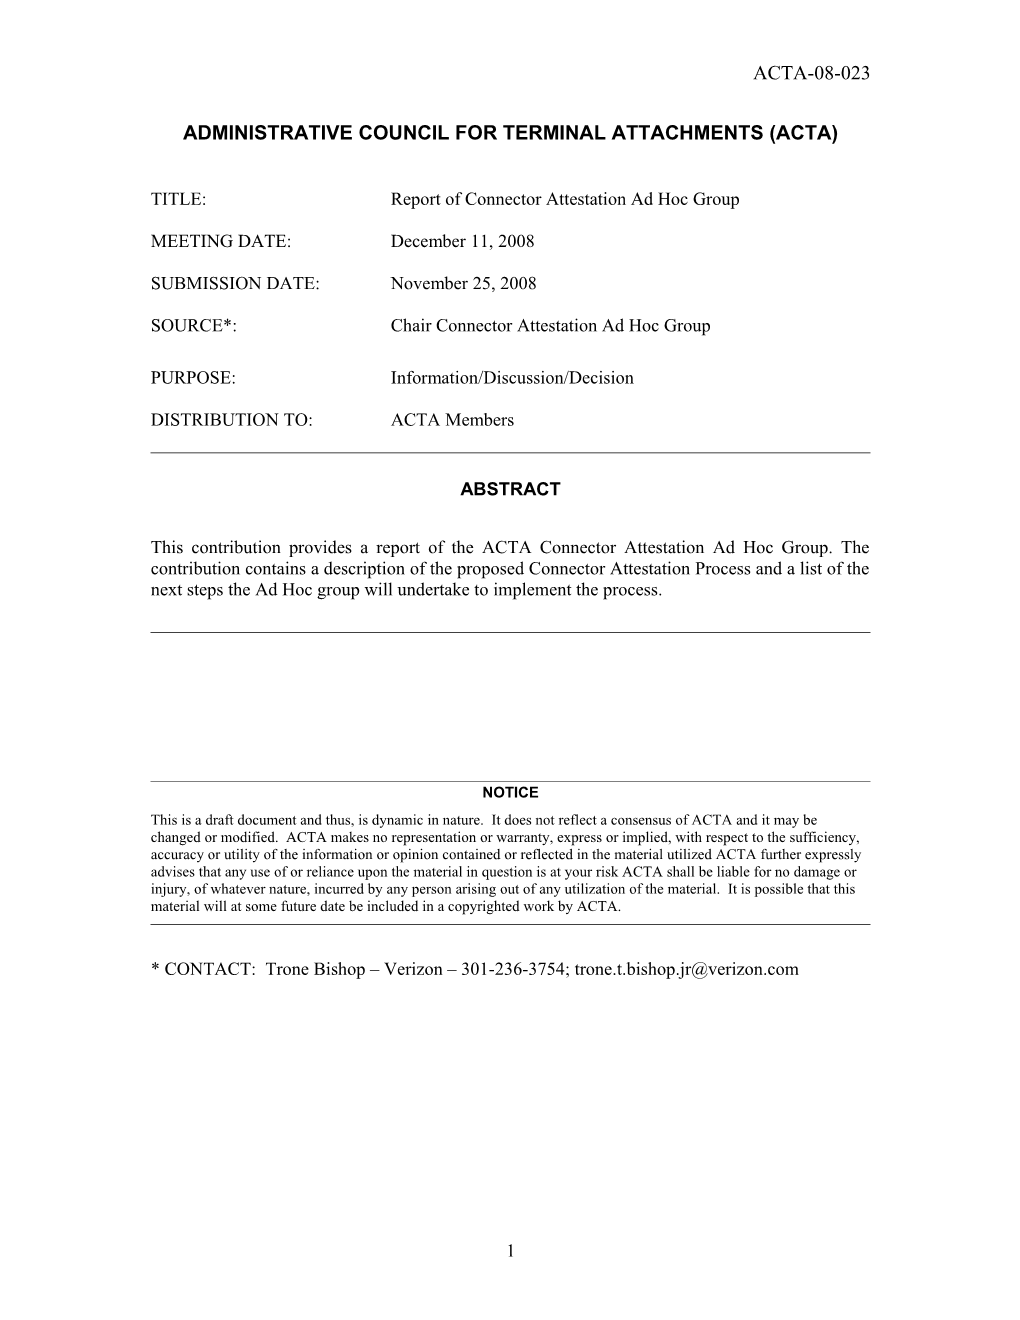 Report of Connector Attestation Ad Hoc Group